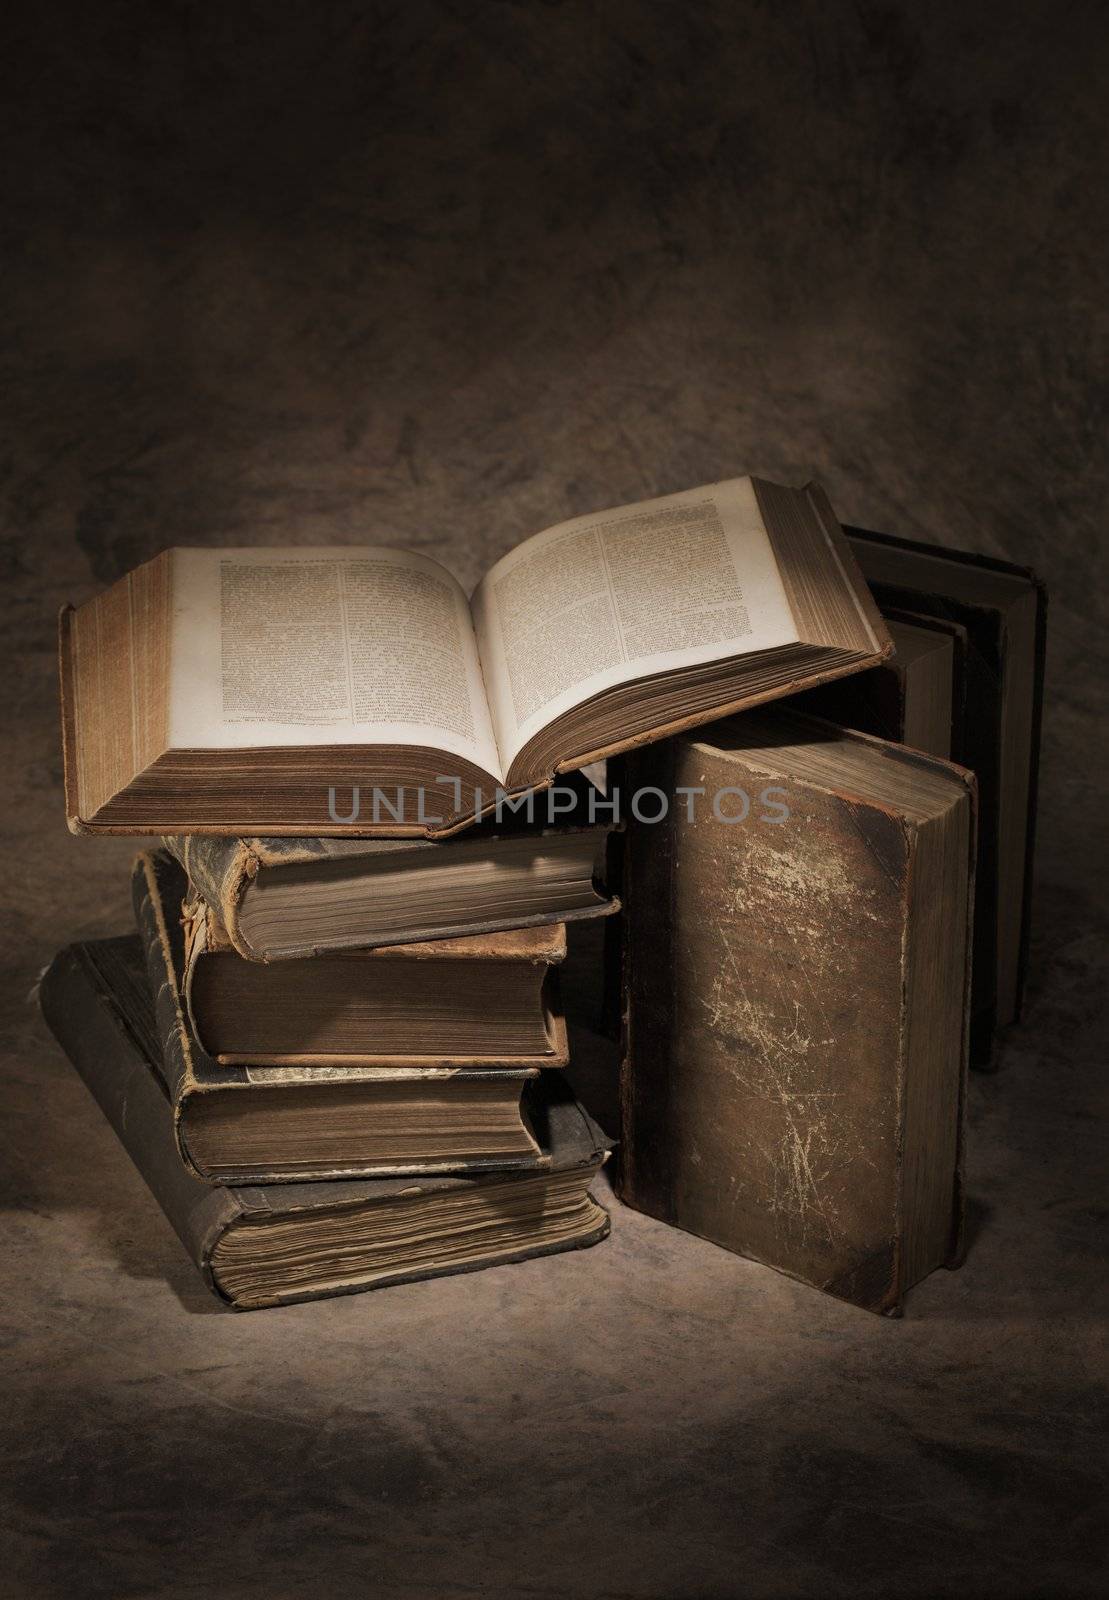 Still life of old antique books. The open book is printed in 1866.